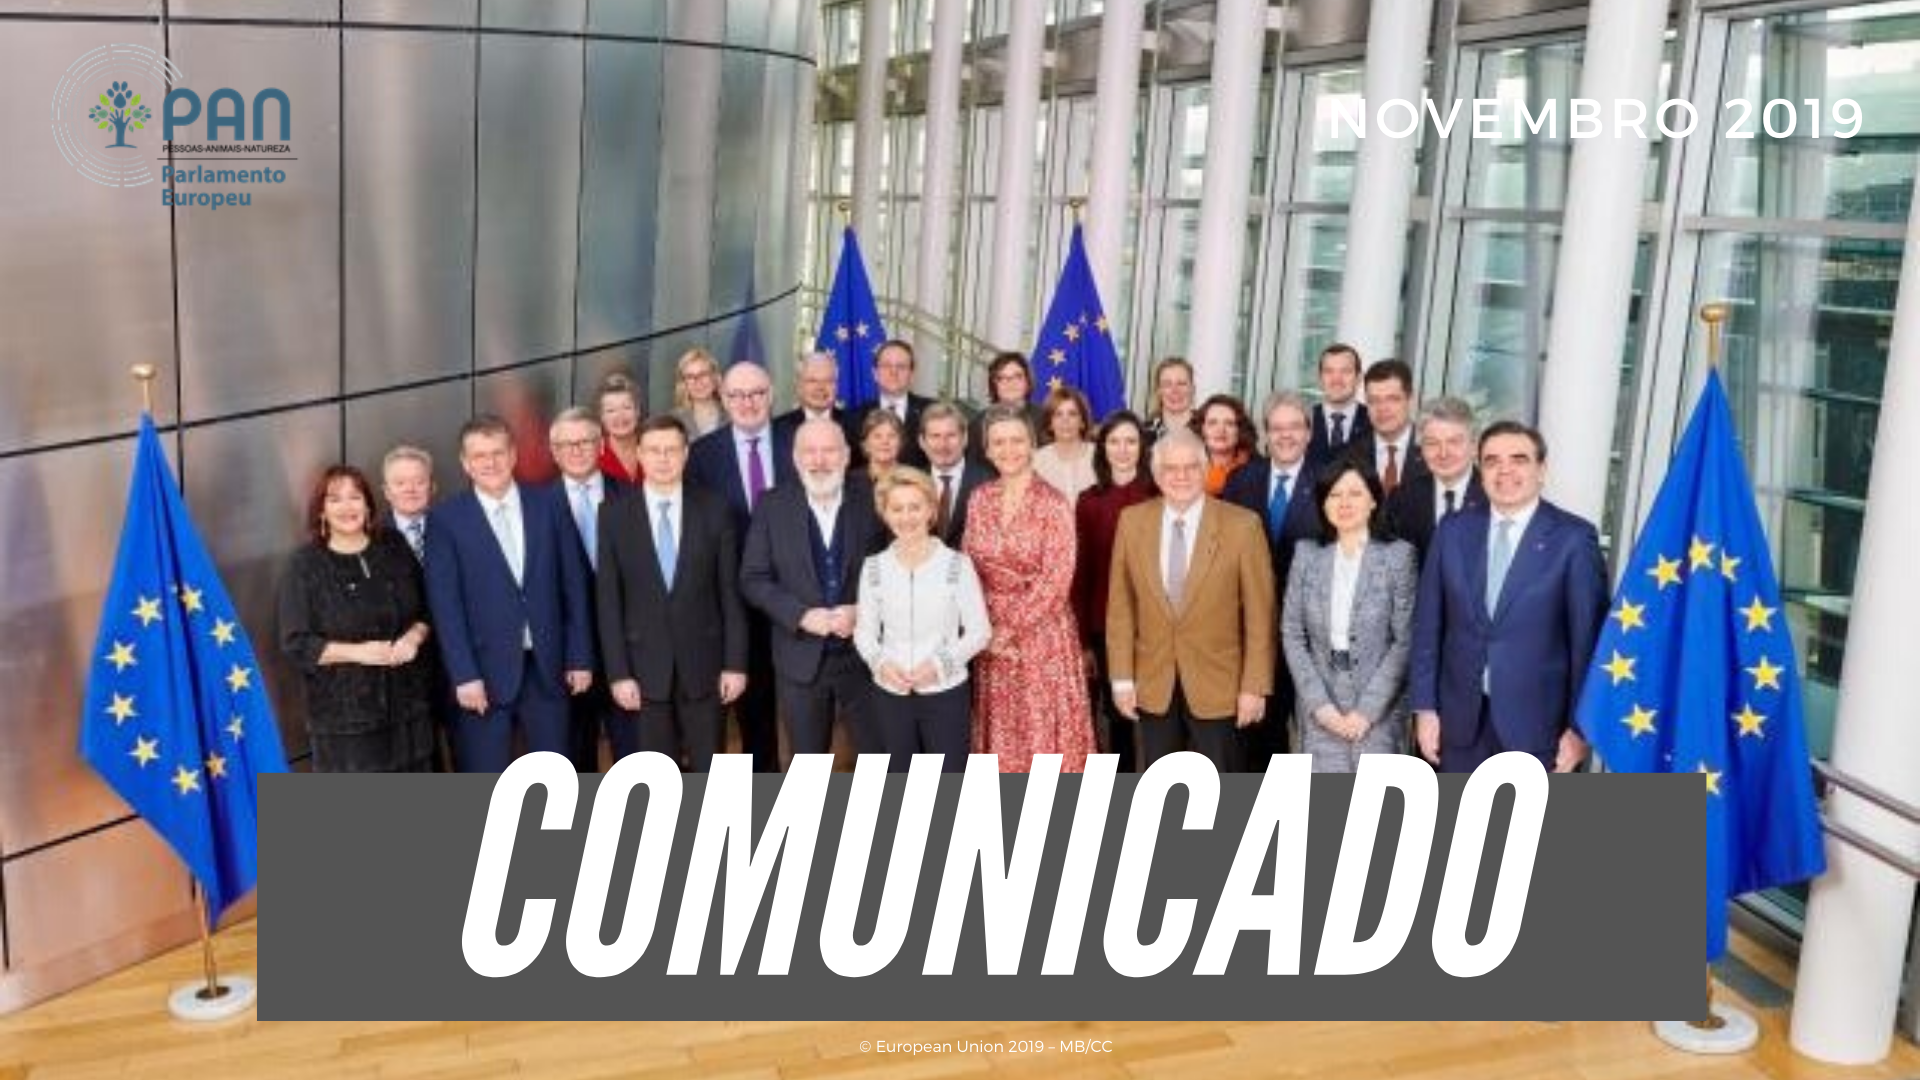 PAN maintains dialogue with the newly elected European Commission